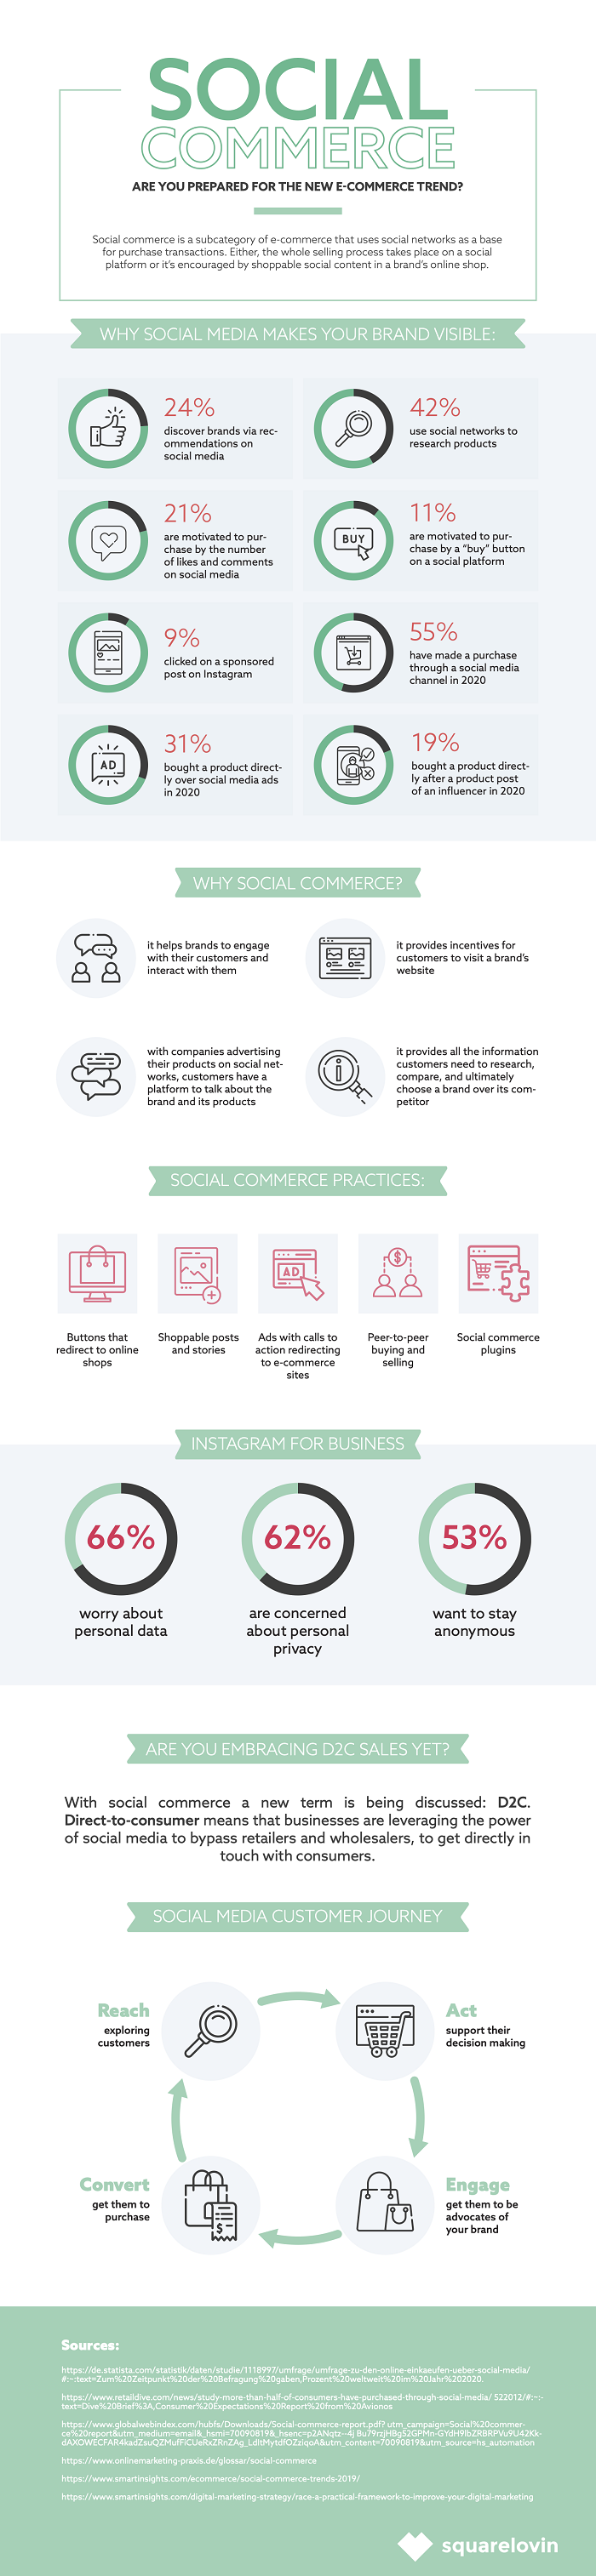 the rise of social commerce infographic